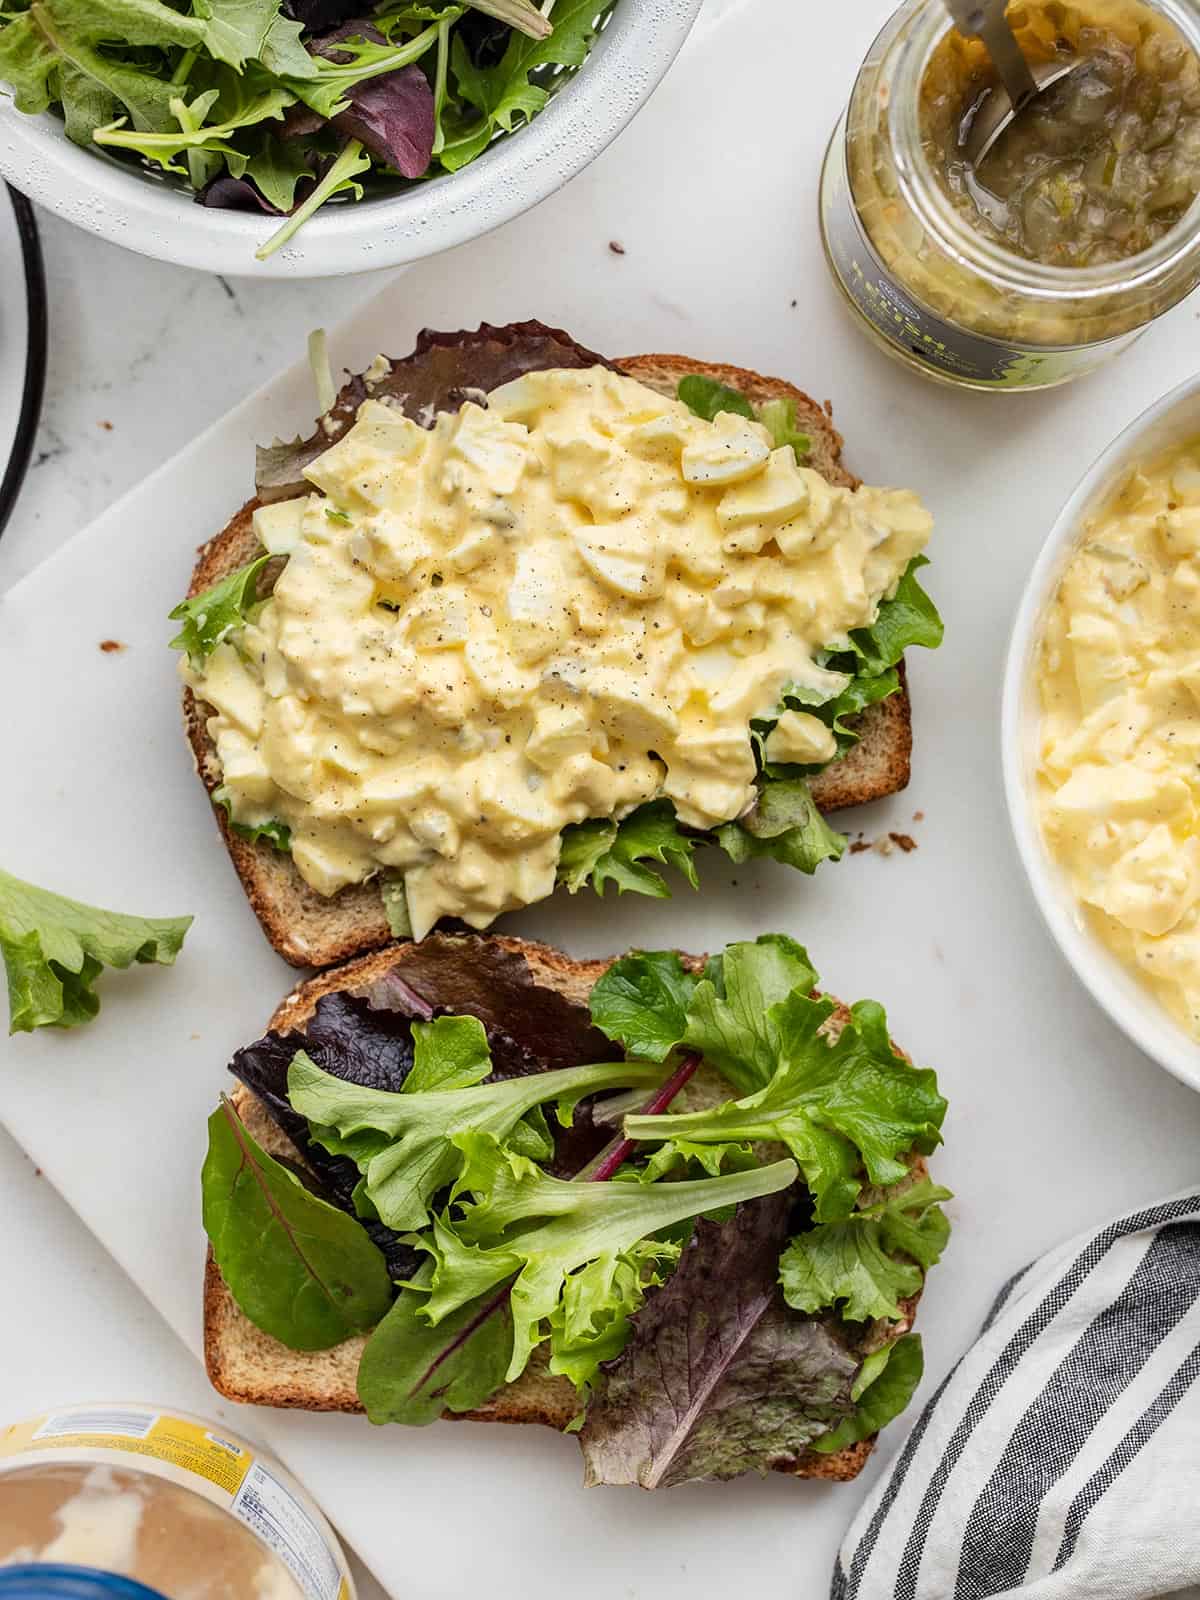 Egg salad on a slice of bread with lettuce and ingredients on the sides